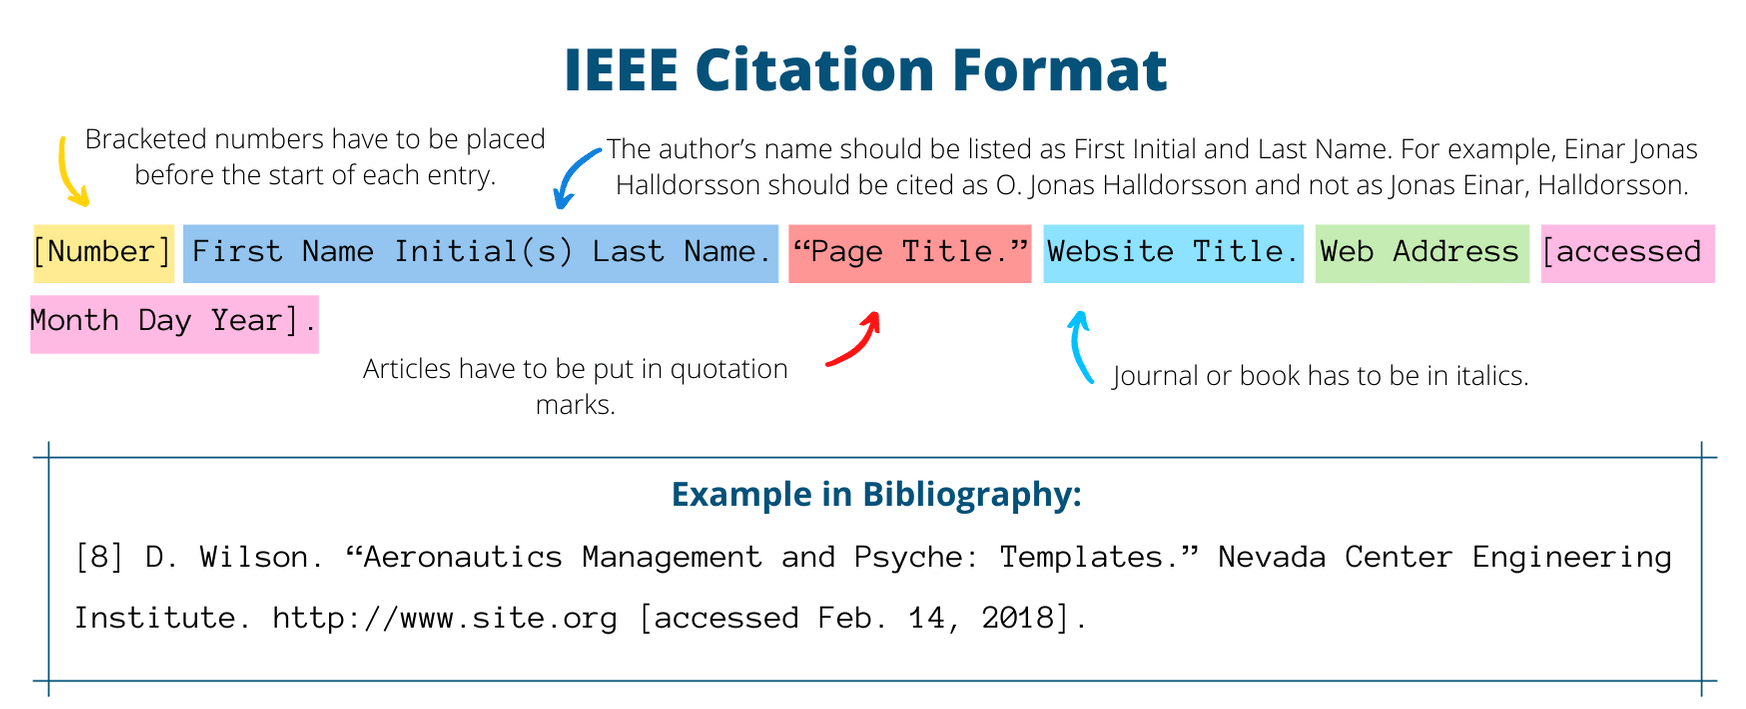 how to cite a research paper in ieee format